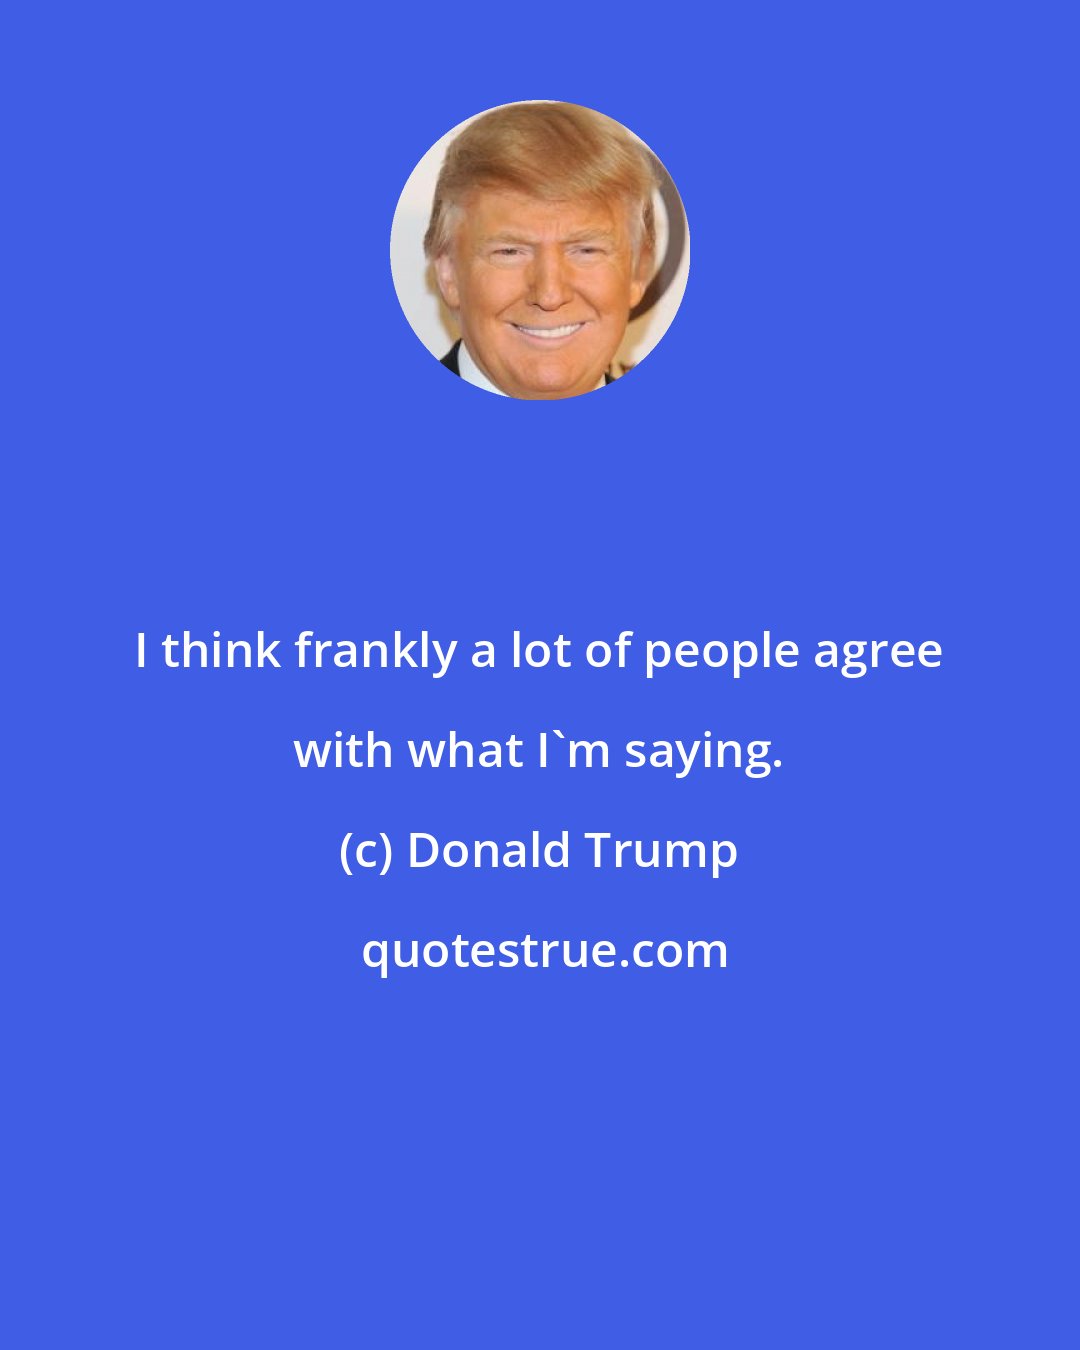 Donald Trump: I think frankly a lot of people agree with what I'm saying.